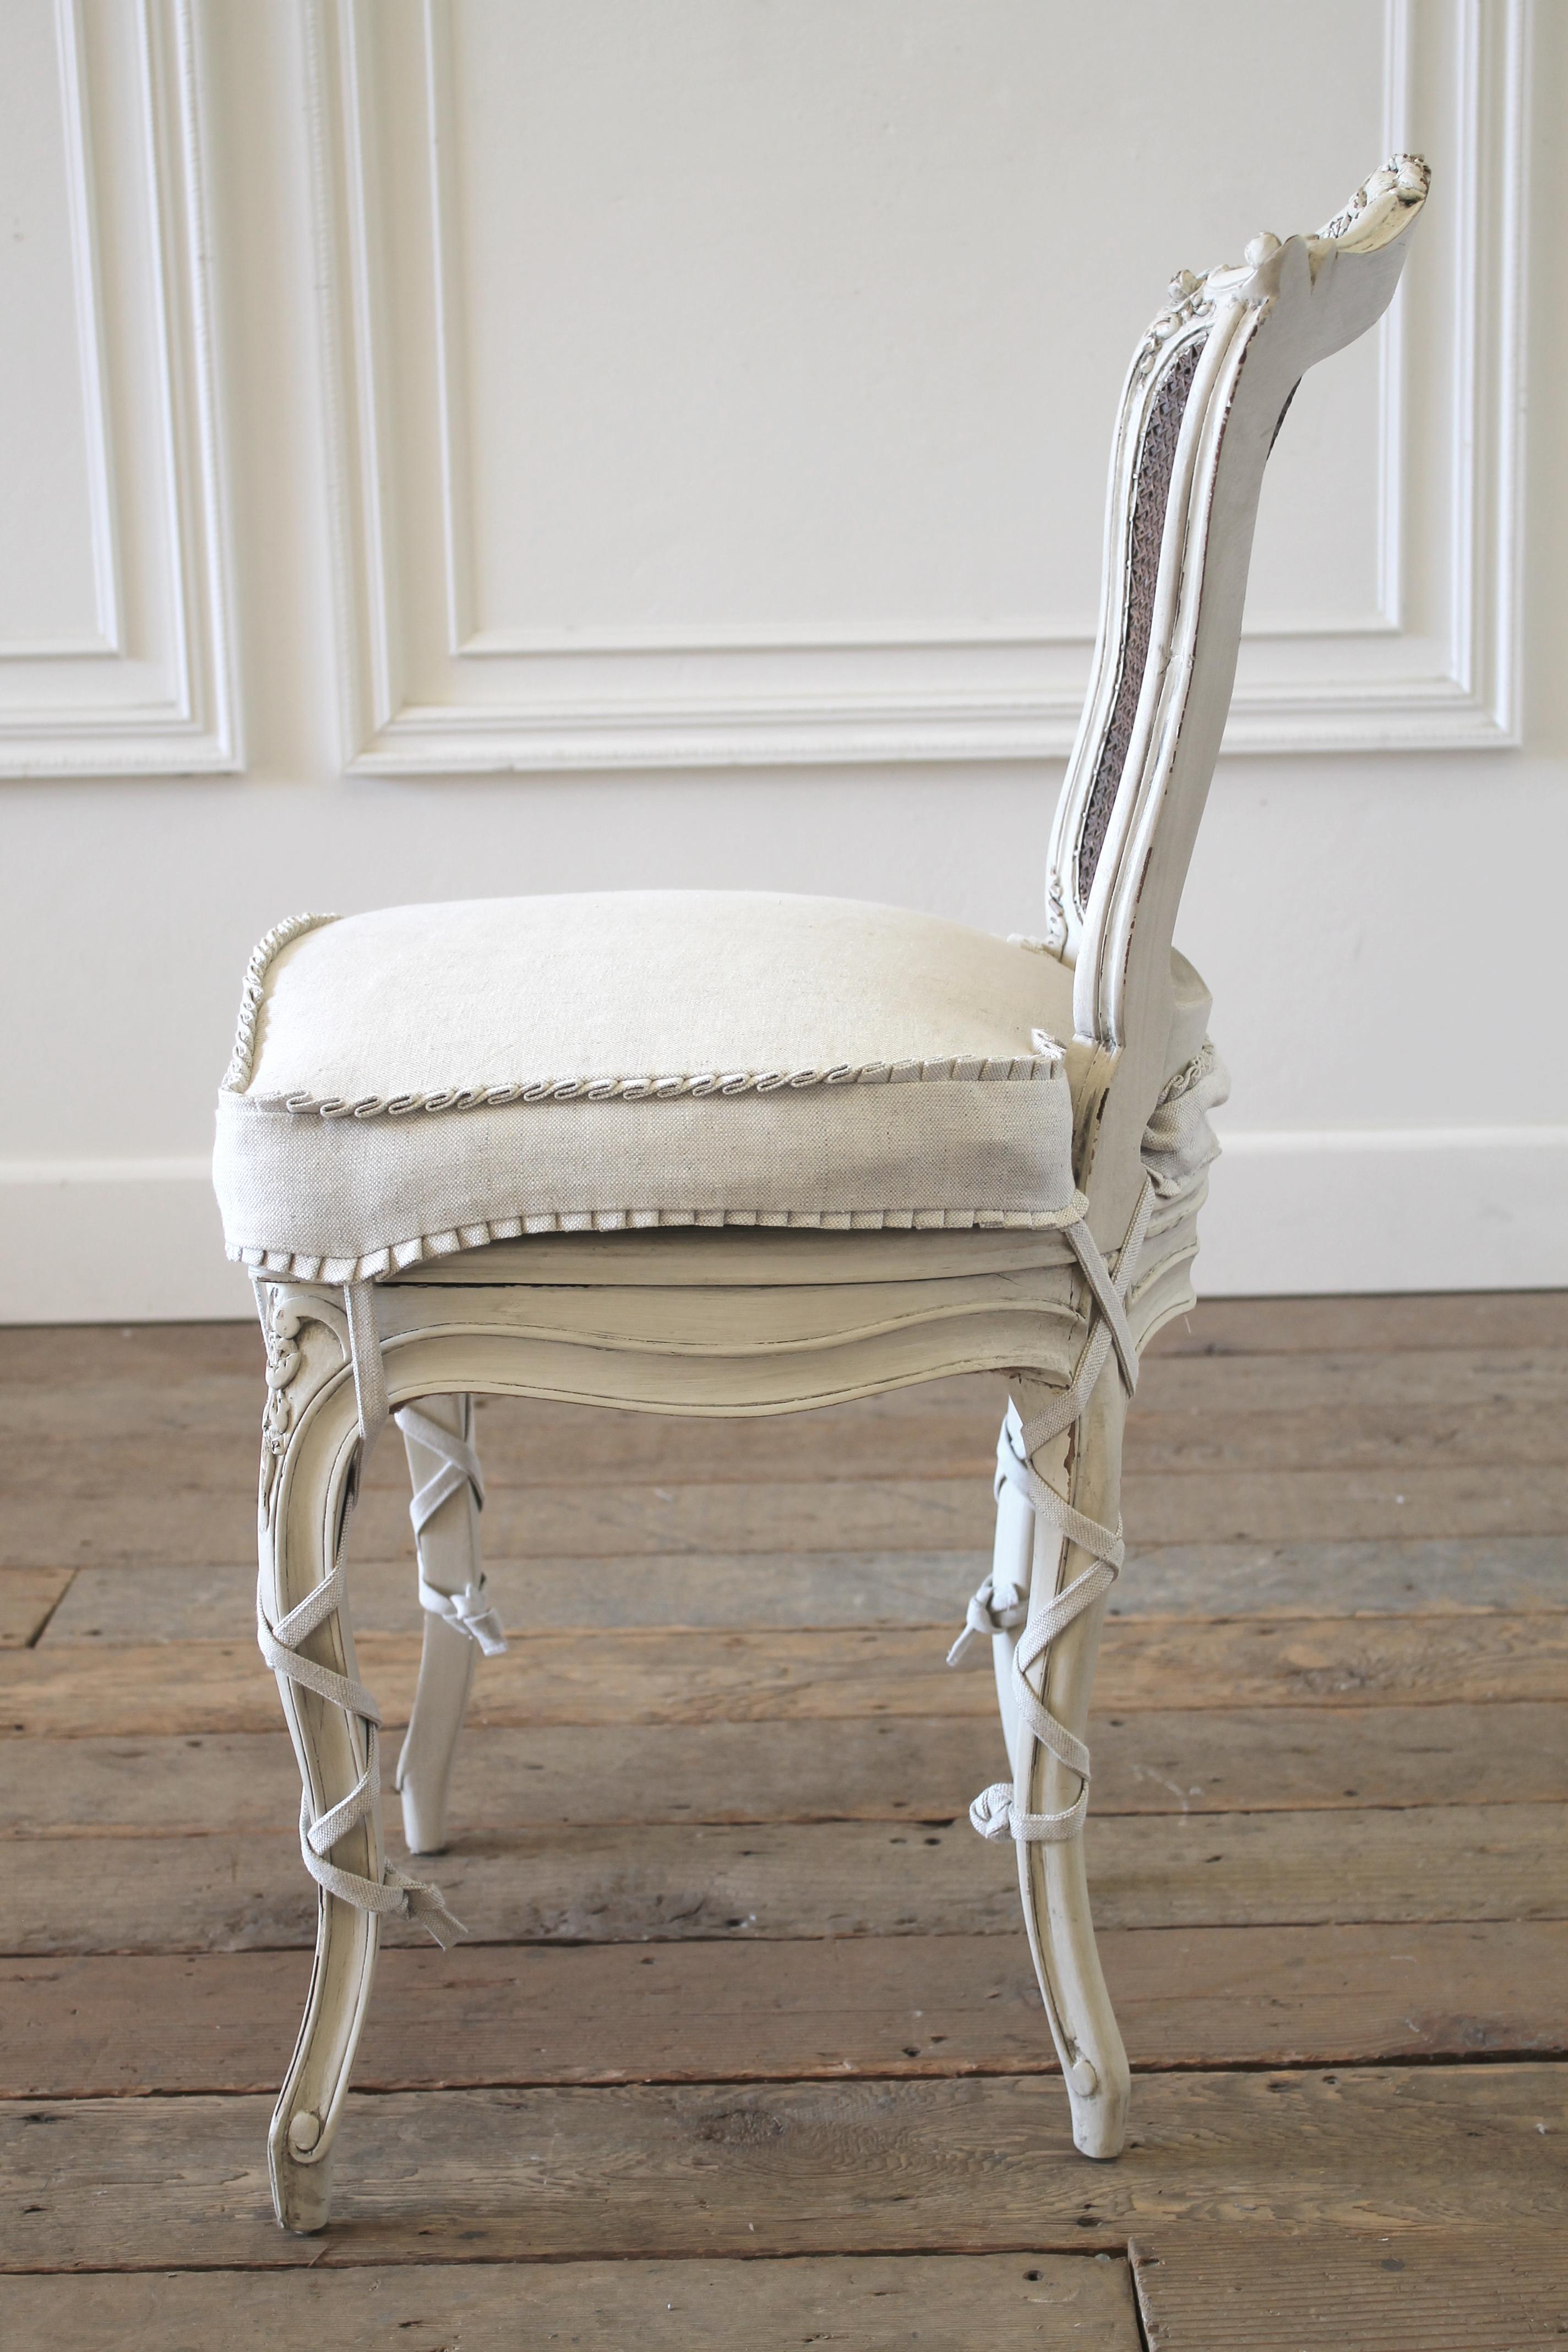 French country cane back vanity chair painted and upholstered Louis XV style vanity chair in natural linen. Painted in our soft oyster white, with subtle distressed edges, and finished with an antique glazed patina. This off white color blends